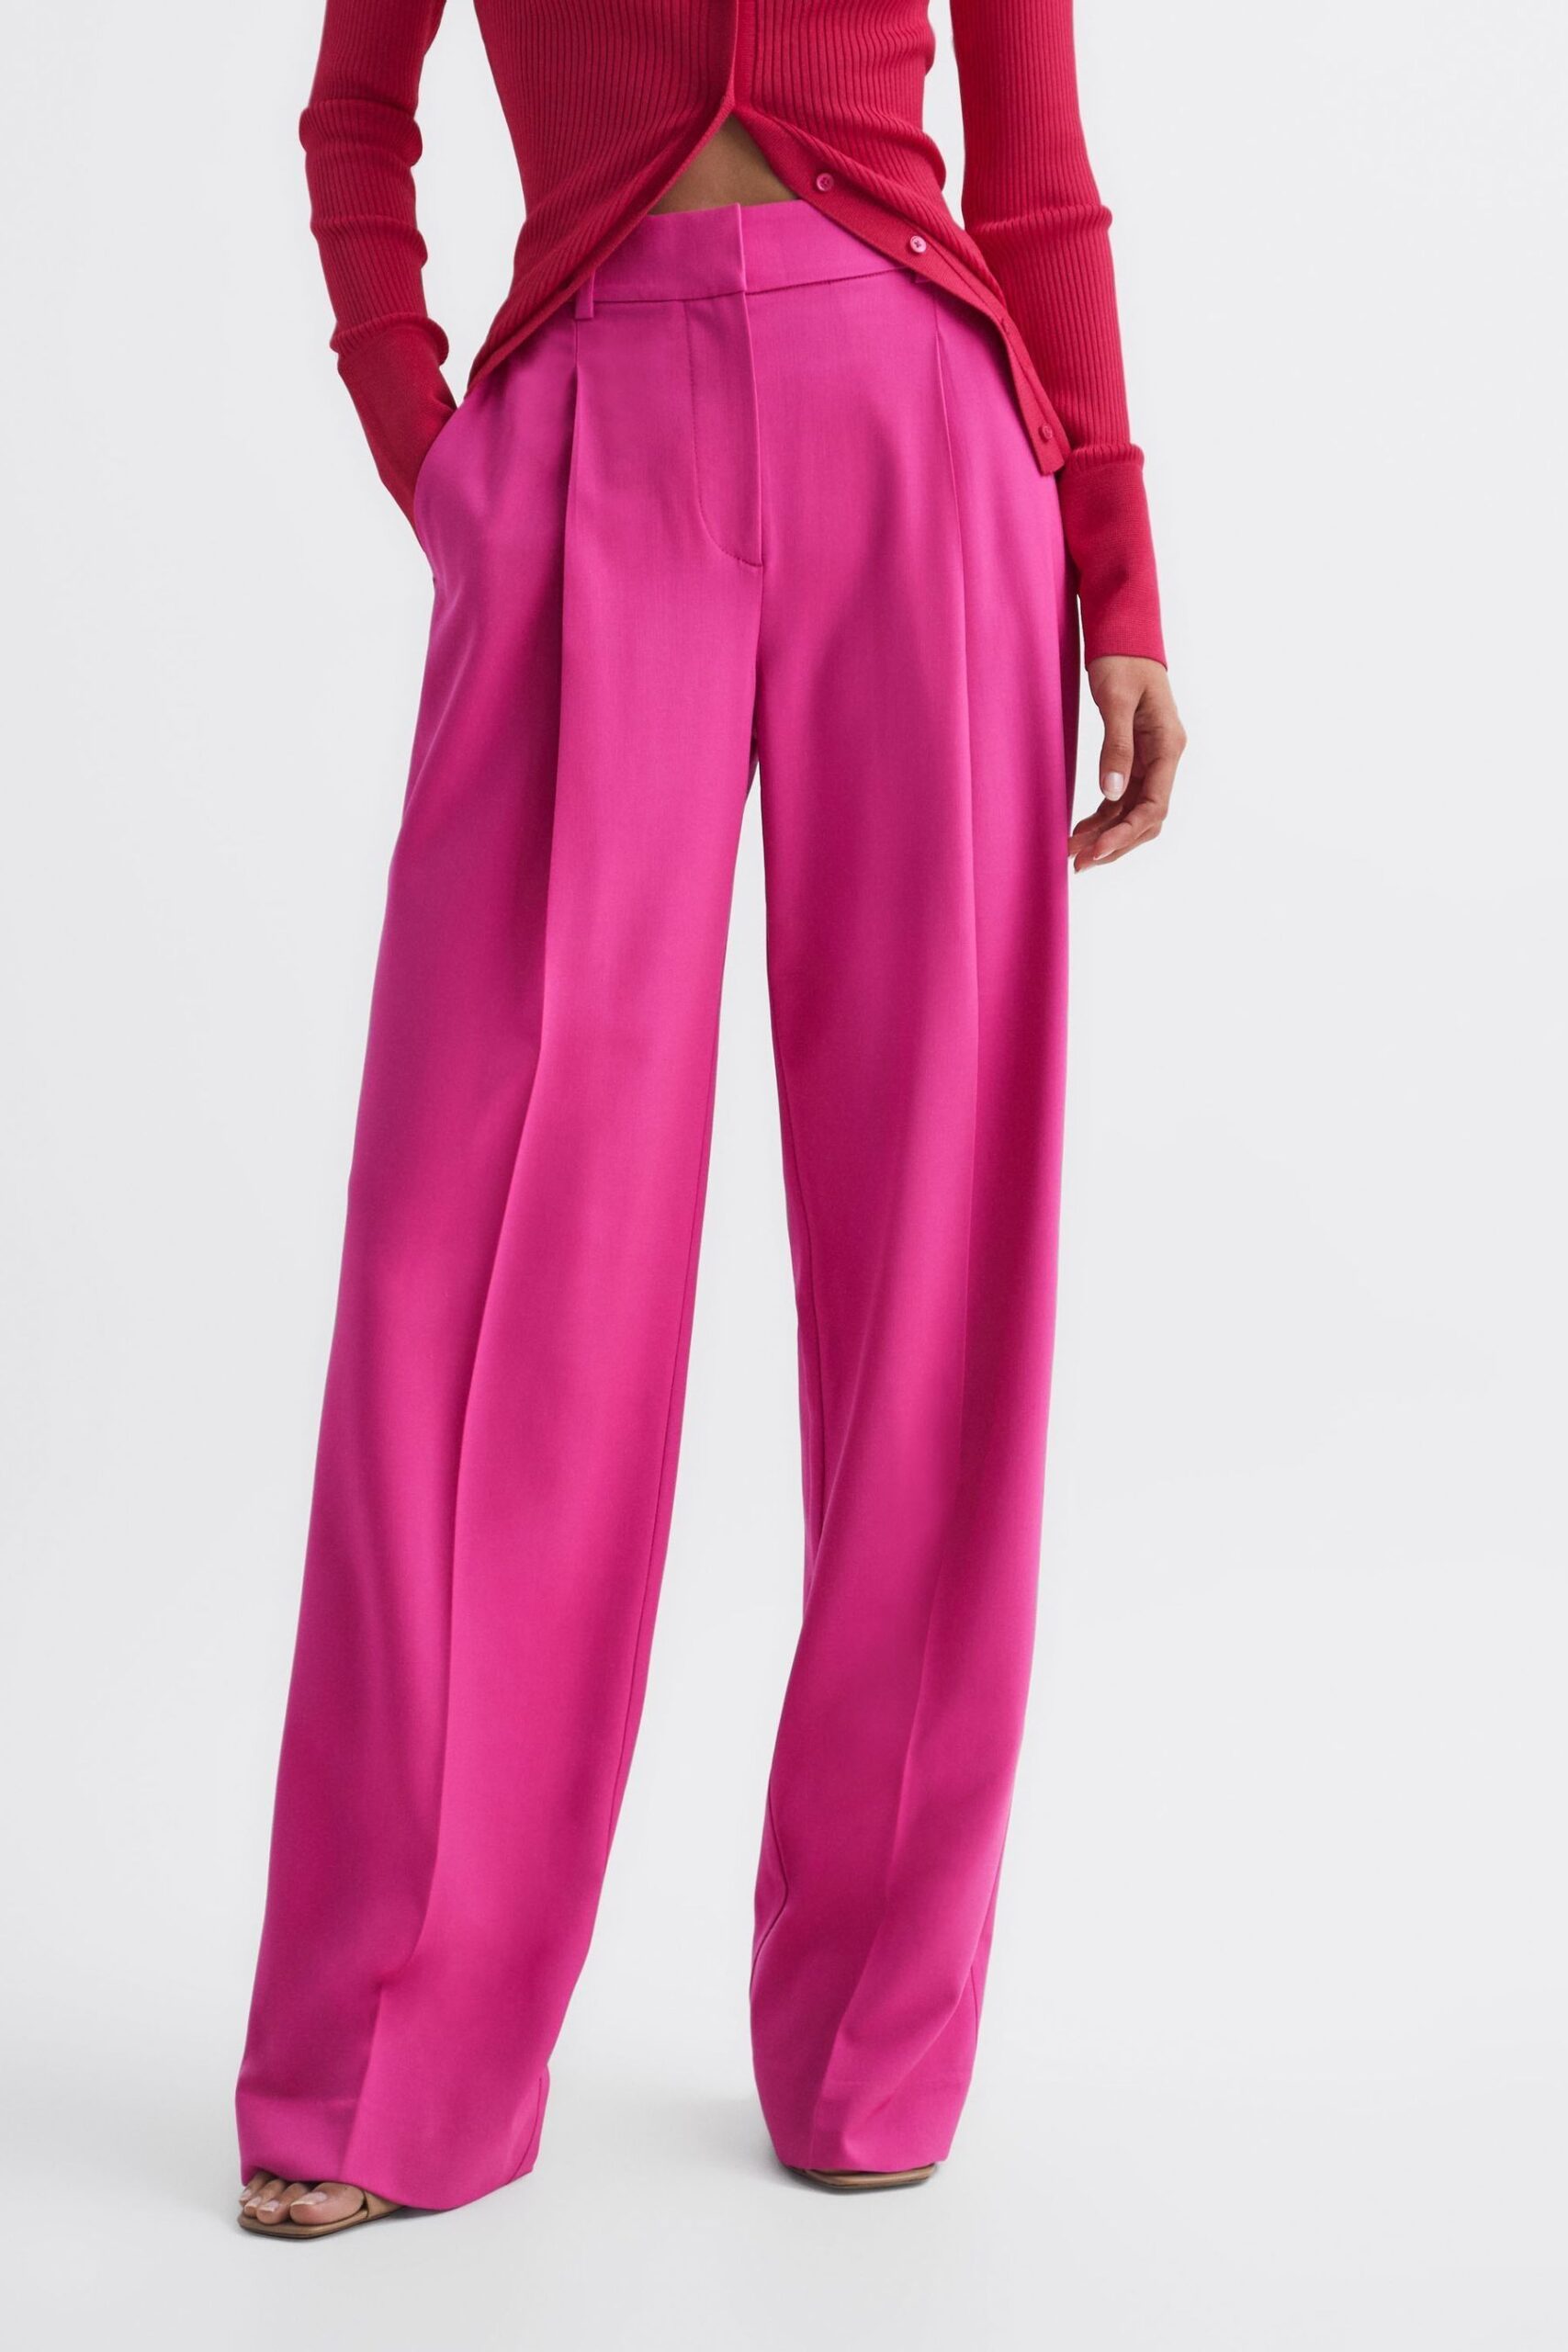 Pretty in Pink: Embracing Femininity with Pink Trousers